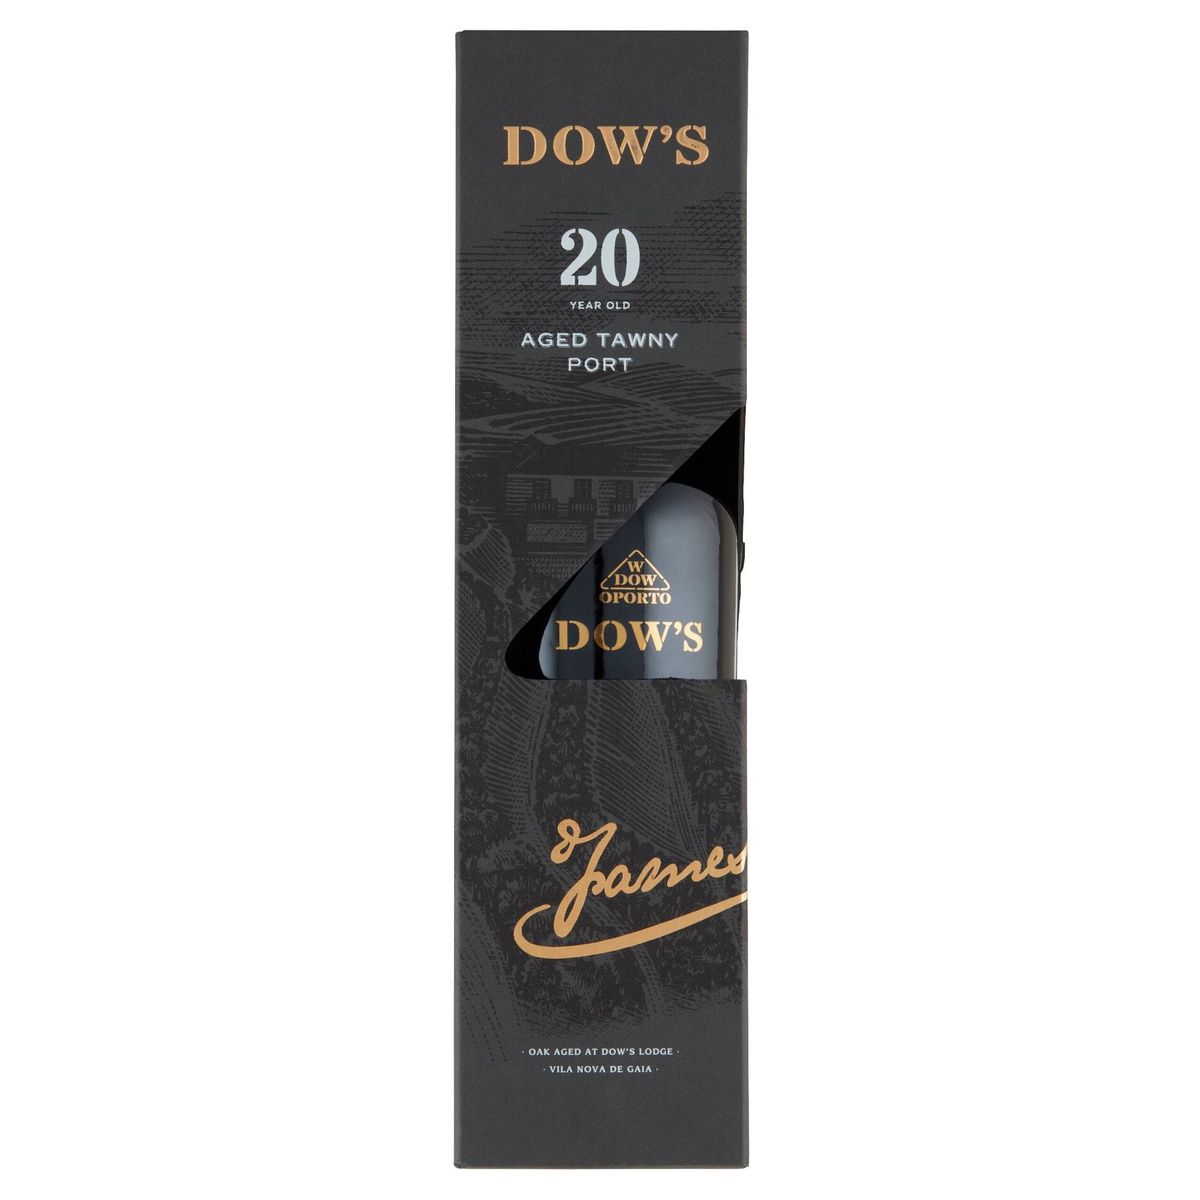 Dow's 20 Year Old Aged Tawny Port 75 cl